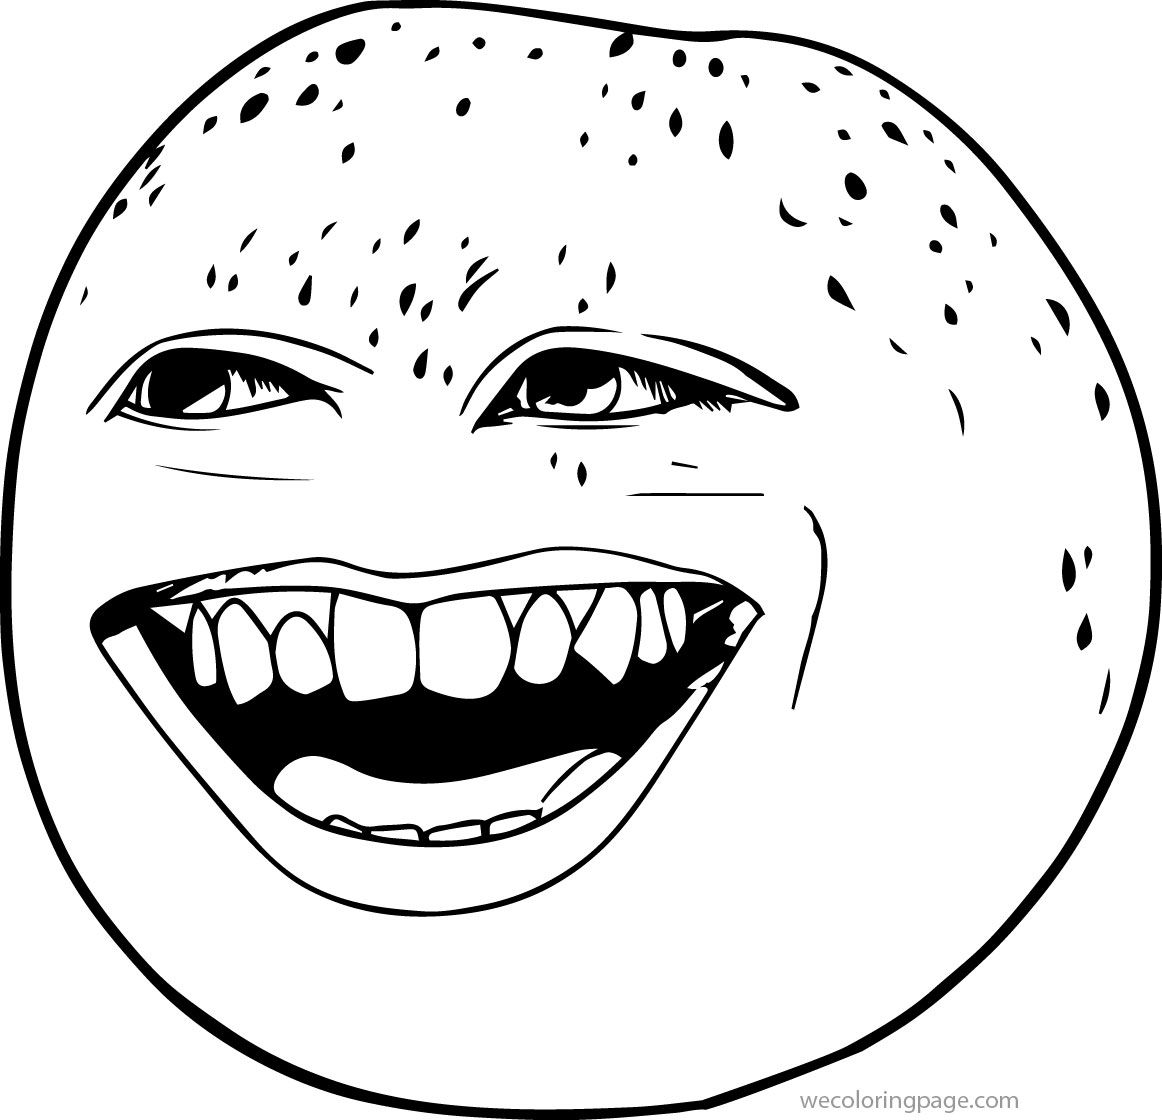 Awesome laugh the annoying orange coloring page annoying orange belle coloring pages coloring pages